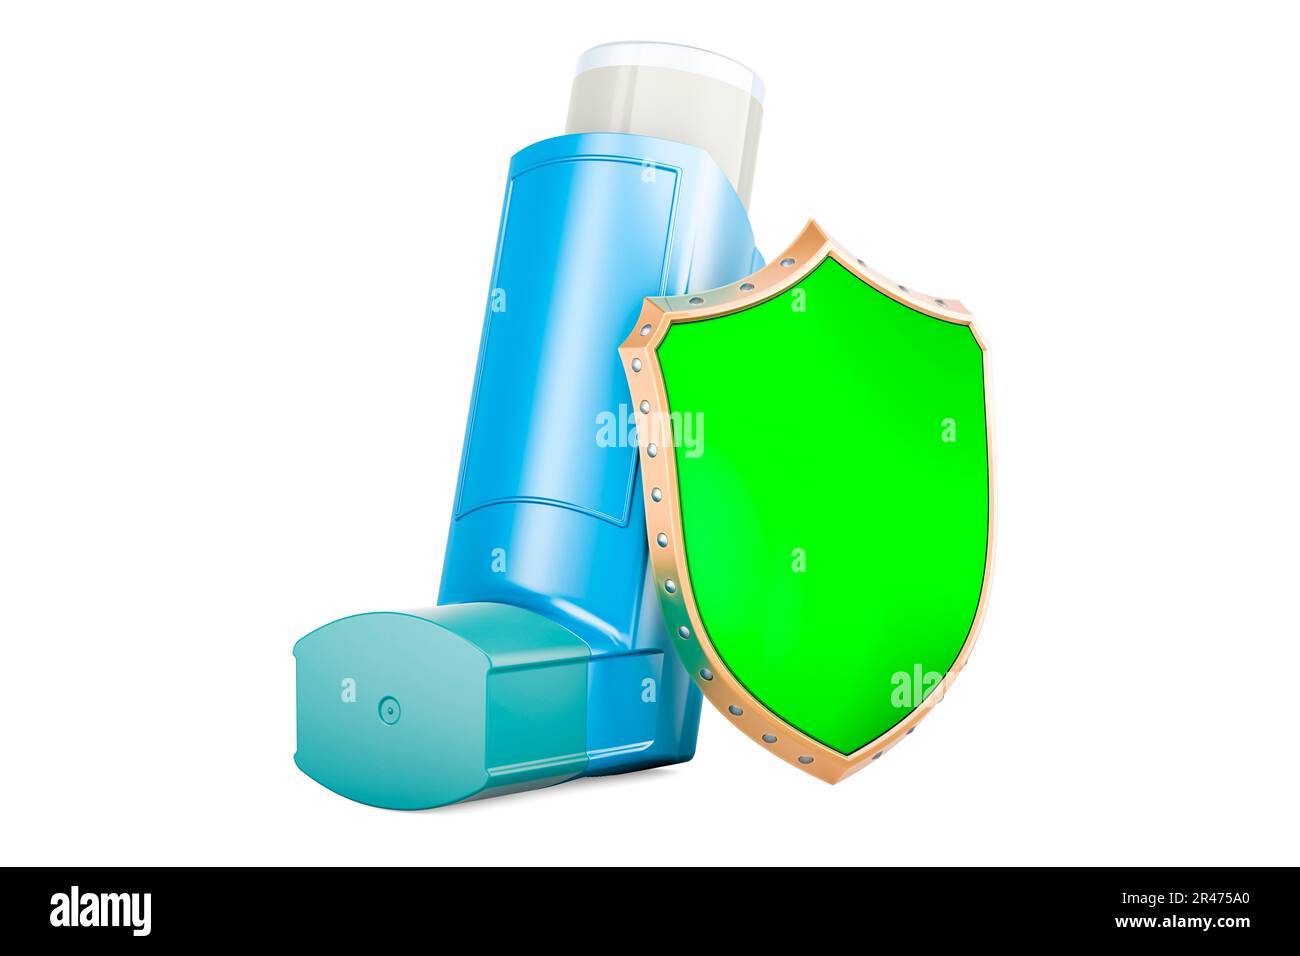 Metered-dose inhaler, MDI with shield. 3D rendering isolated on white background Stock Photo